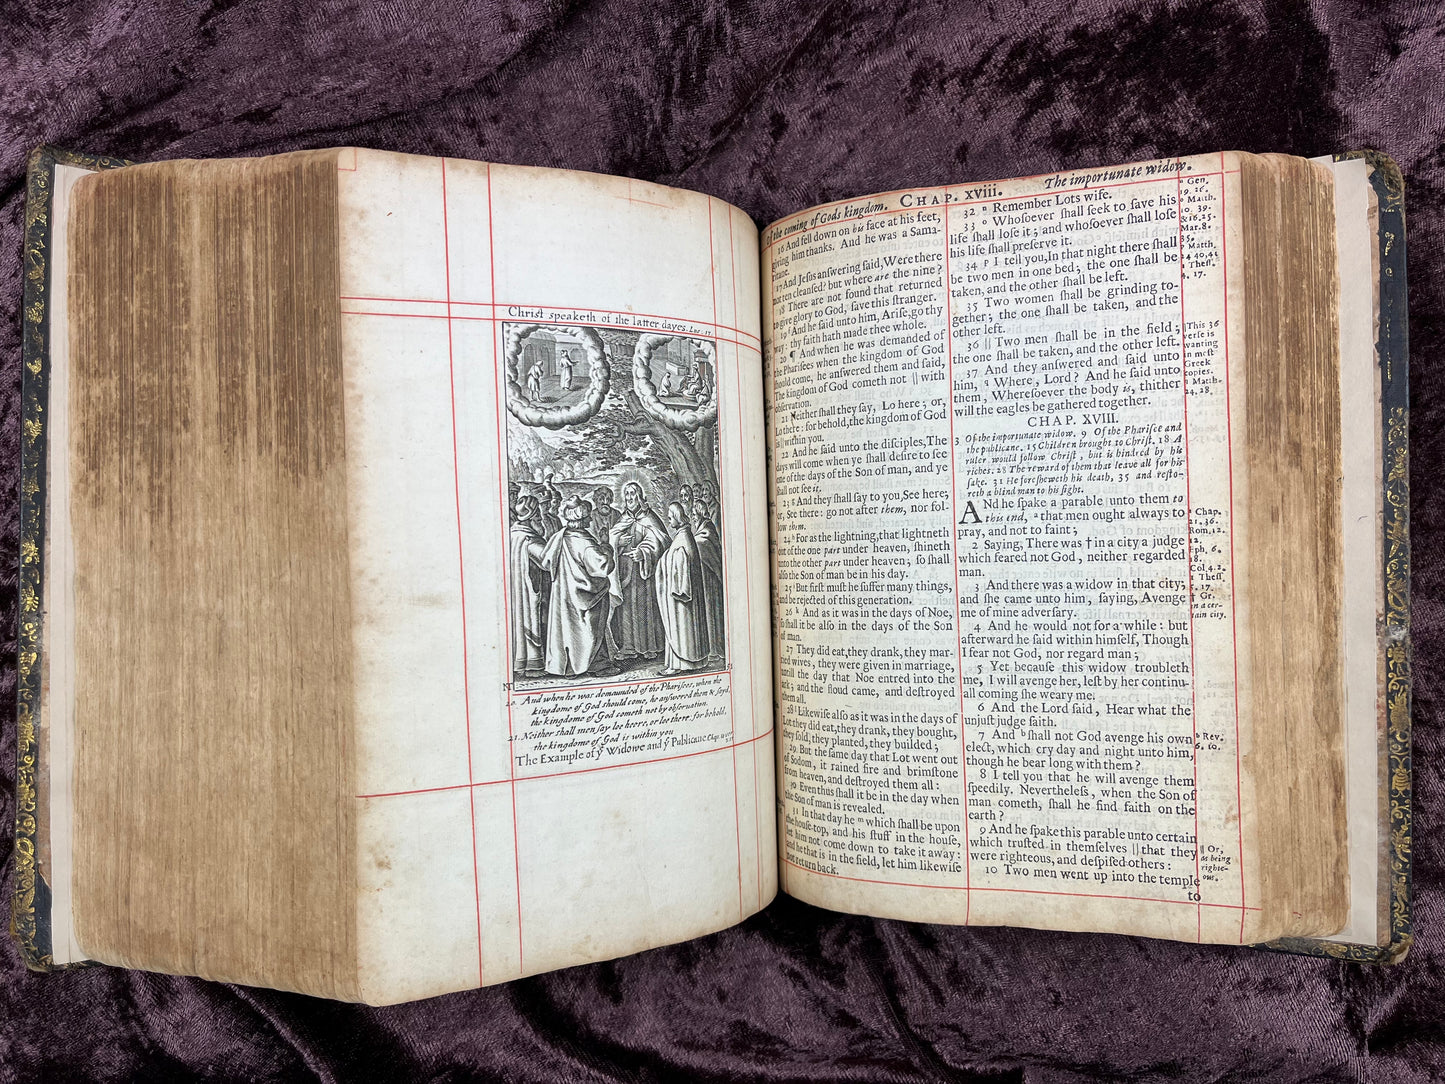 1677 Quarto King James Bible Ruled in red Printed By John Hayes in Cambridge-Bound With 205 Extra Illustrations and The Whole Book of Psalms